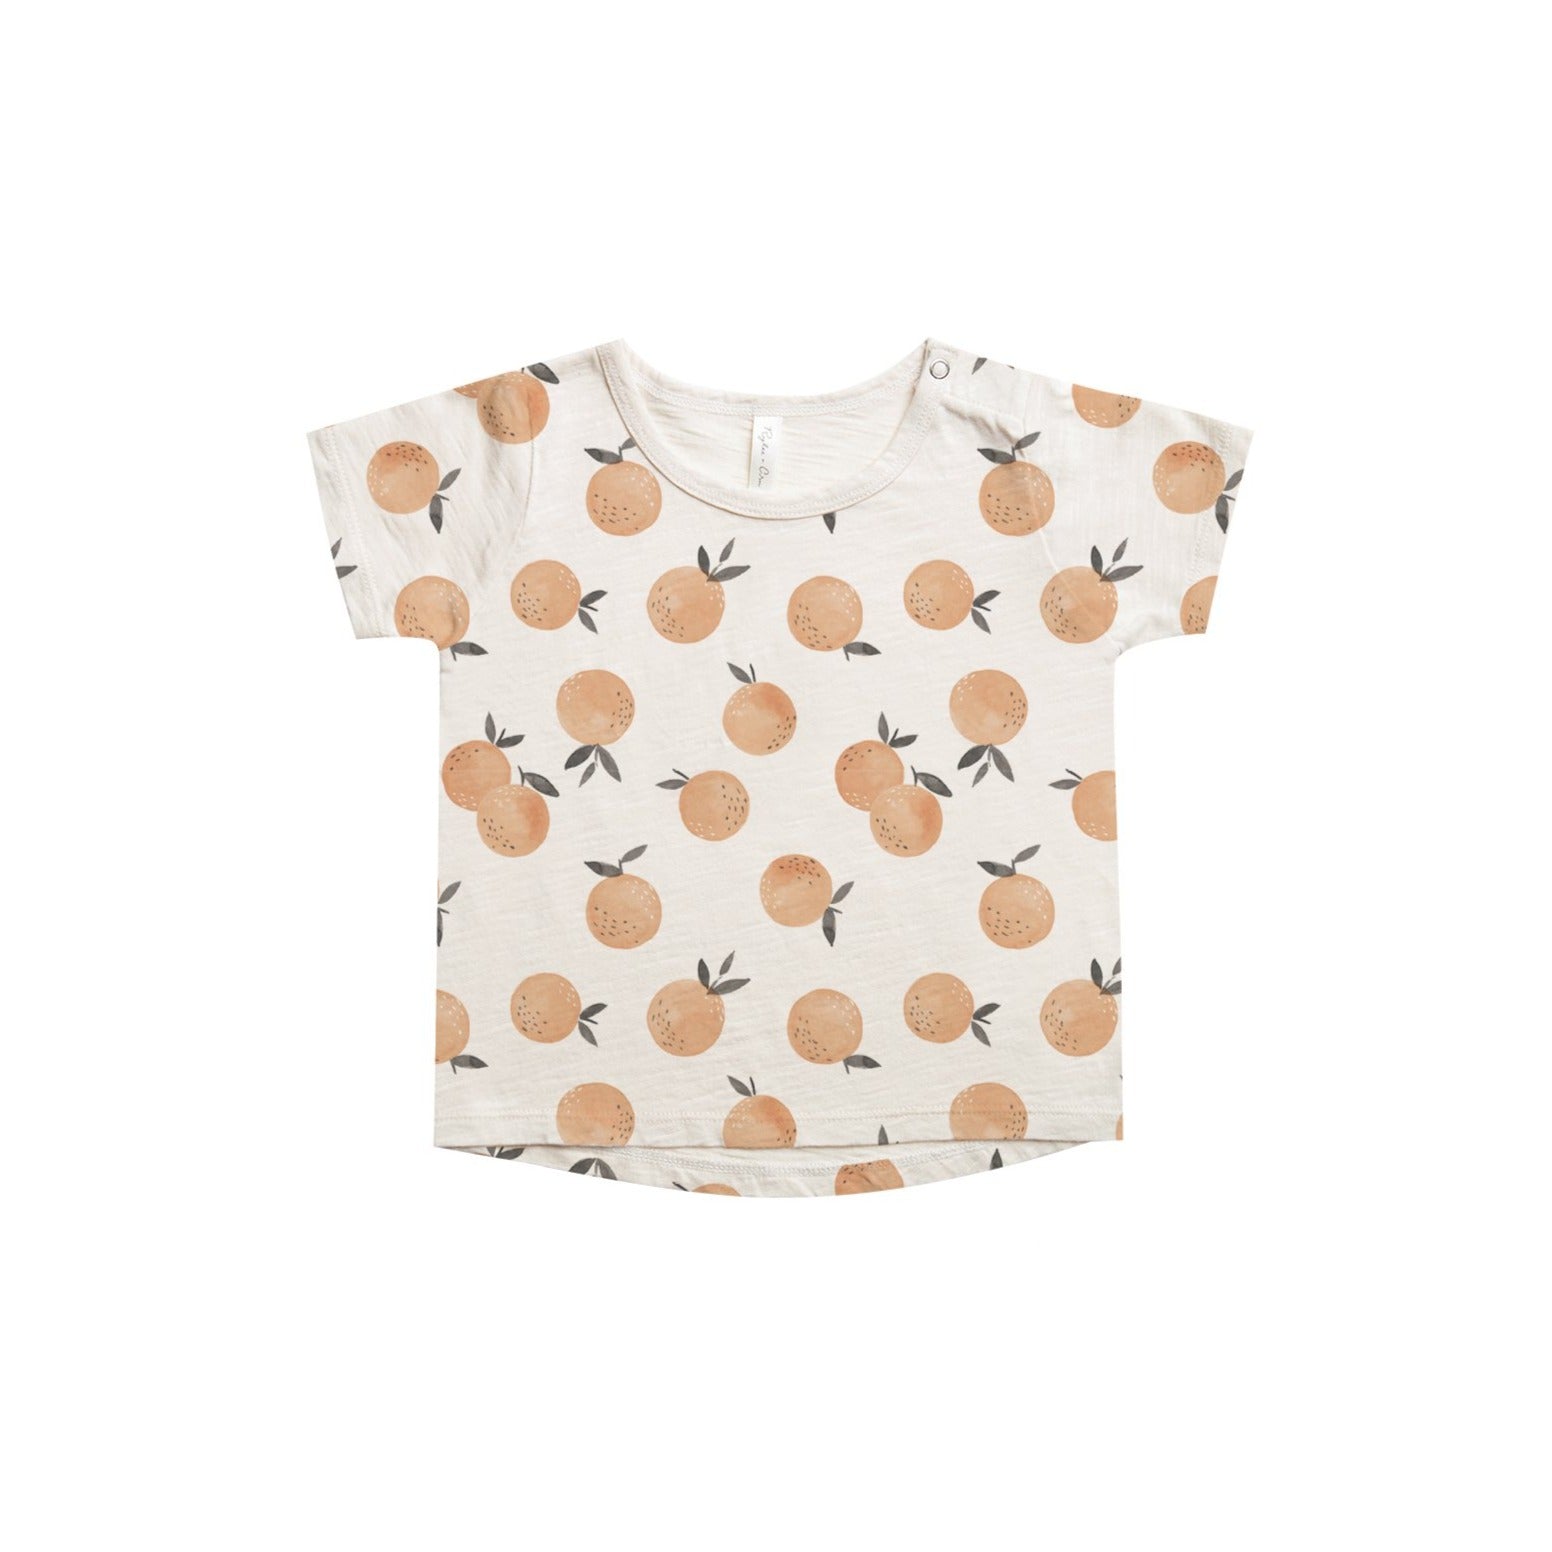 Rylee and Cru Women's Ringer Tee - Dreamer - Natural-Amber | The Baby Cubby XS